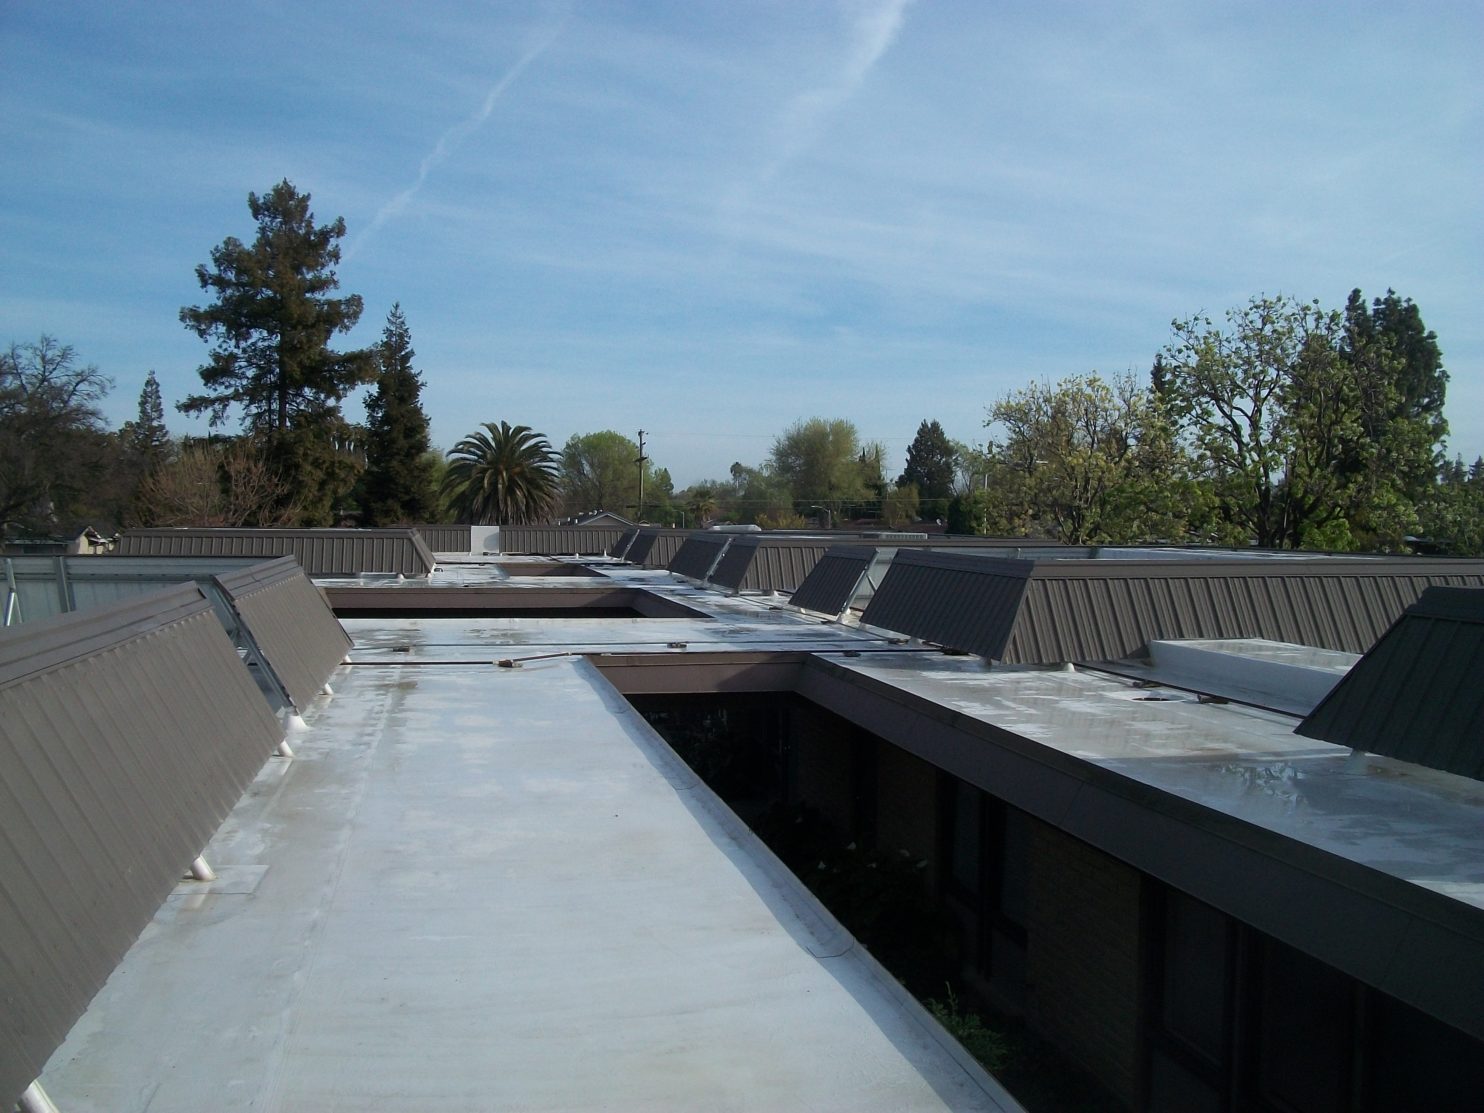 Recent Roof Makeover: How a Few Roof Repairs Can Make a Big Difference